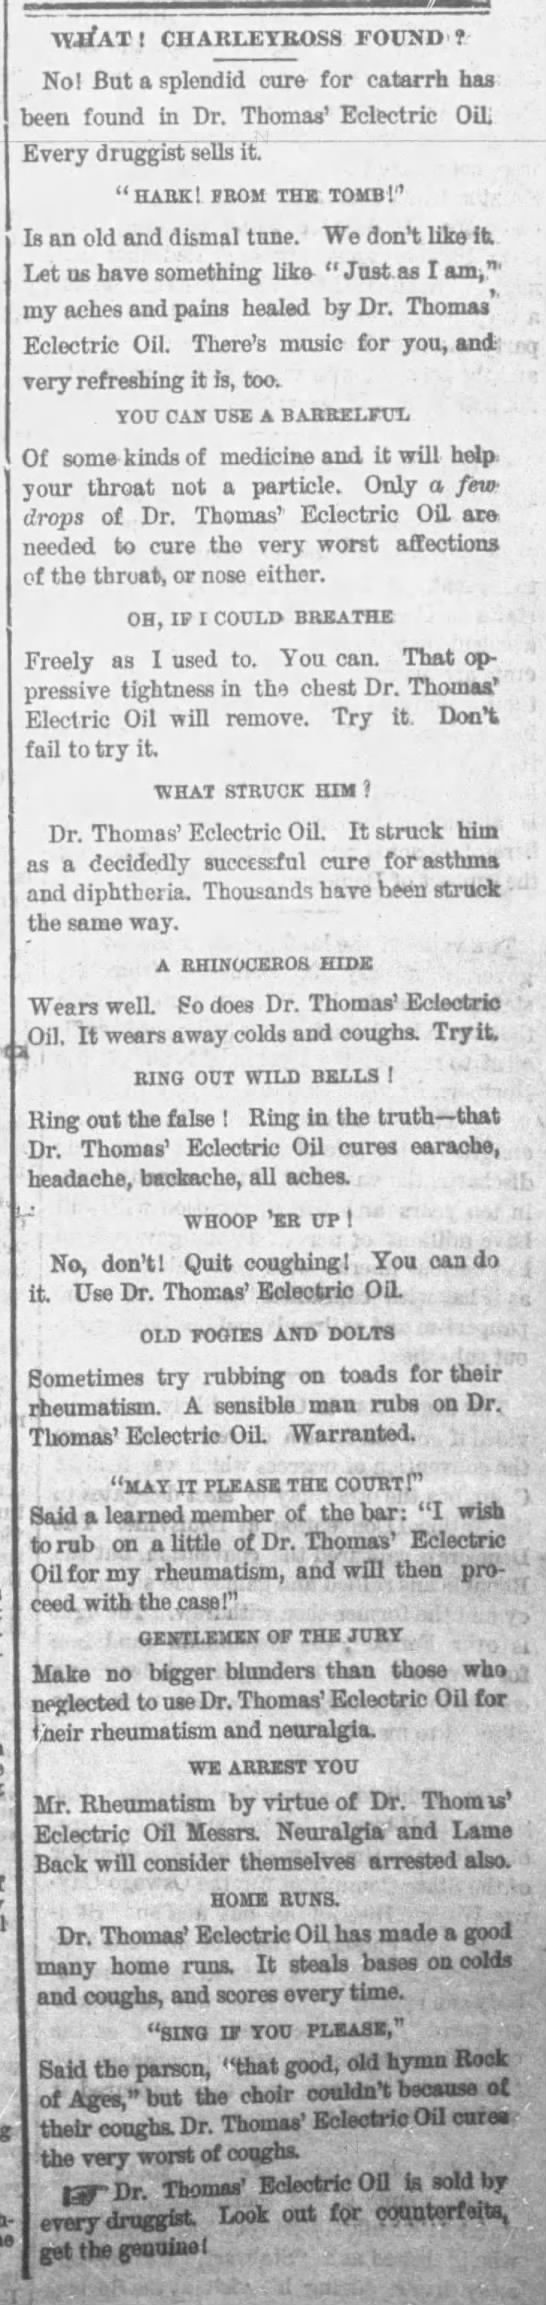 Dr. Thomas' Eclectric Oil ad (1883) - 